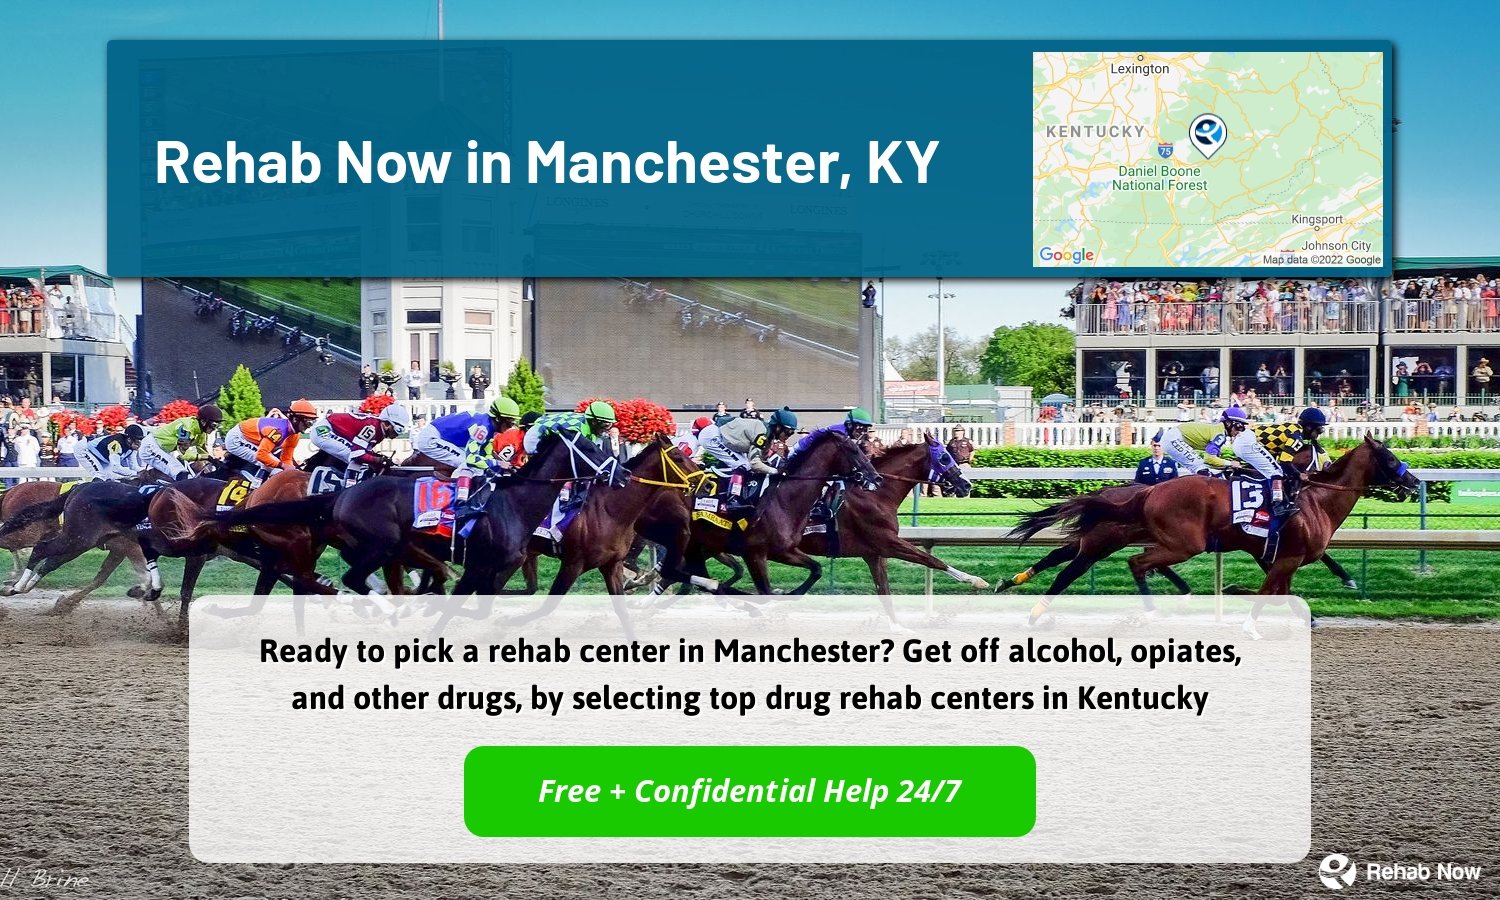 Ready to pick a rehab center in Manchester? Get off alcohol, opiates, and other drugs, by selecting top drug rehab centers in Kentucky